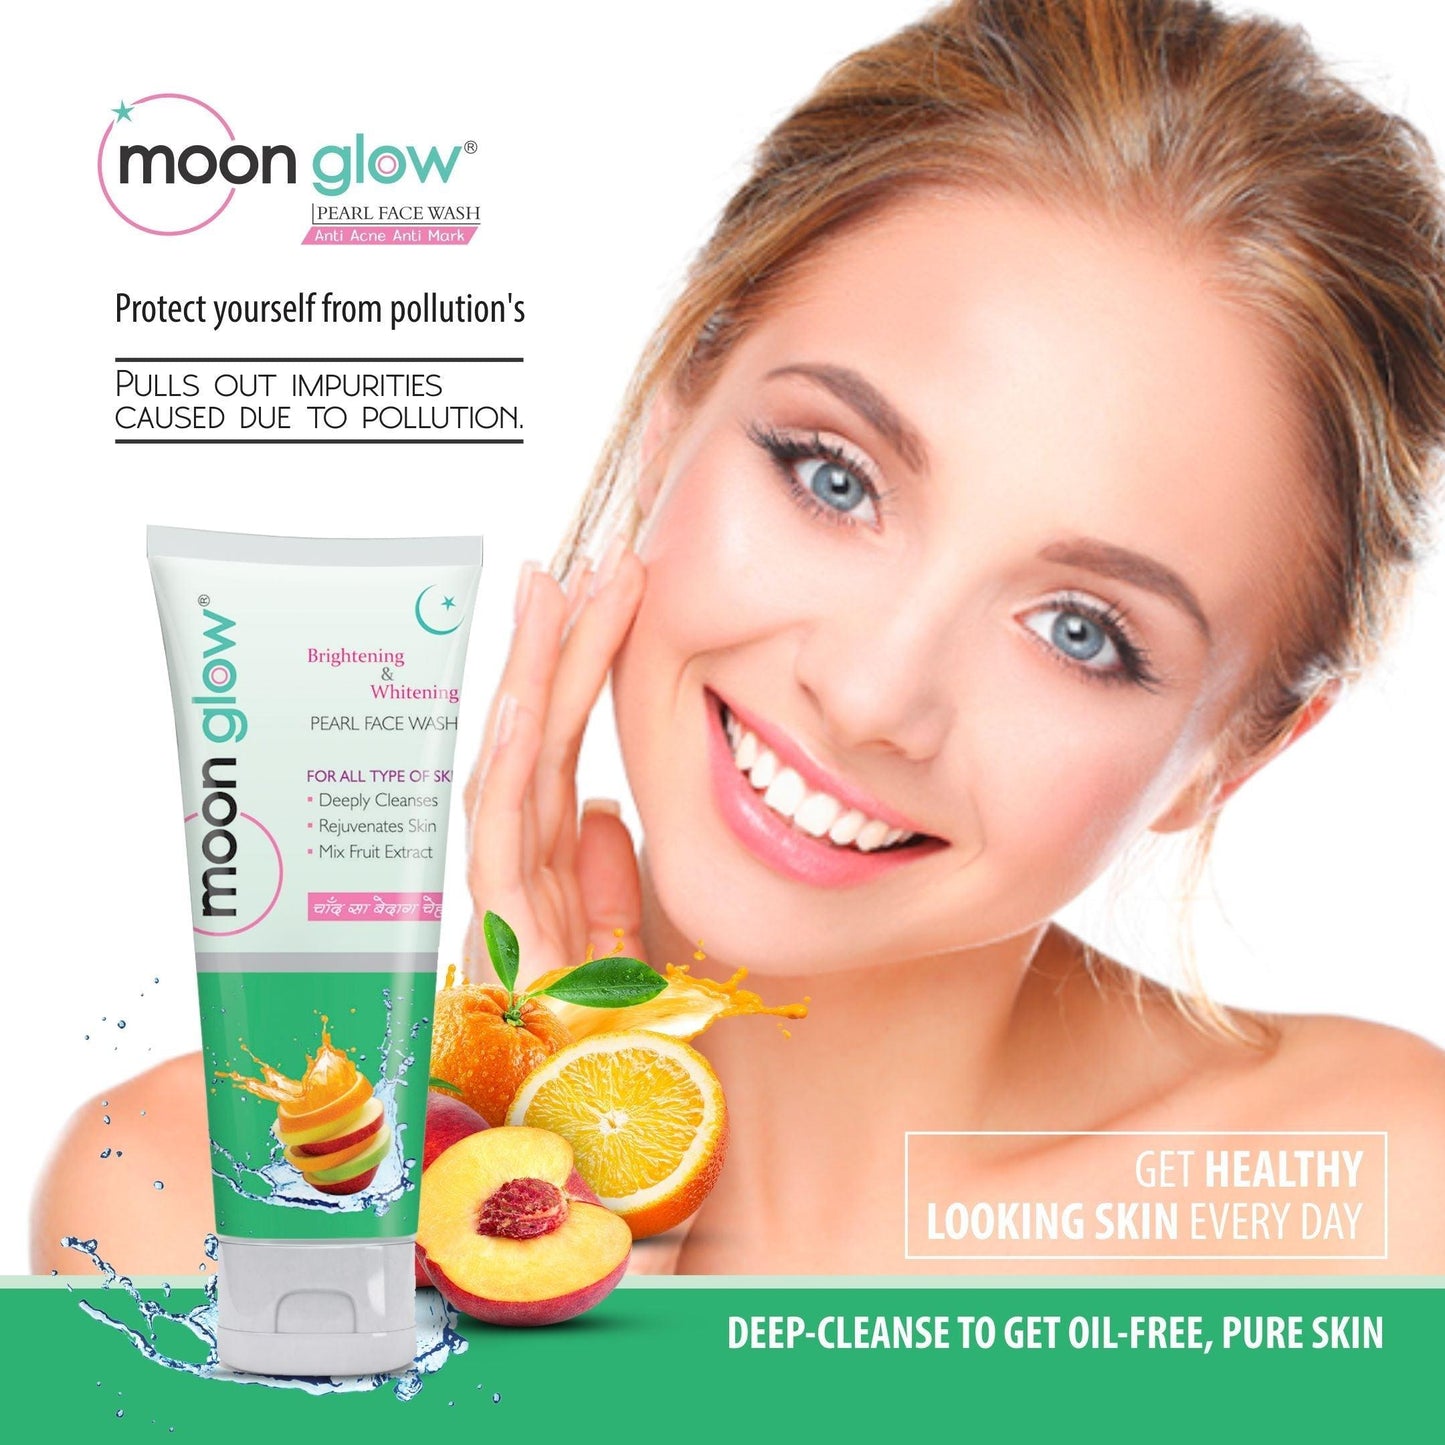 Moon Glow Cream & Pearl Face Wash for Acne, Pimples, Black Spots, Dark Circles, Stretch Marks, Anti-Aging and Fairness (1 Cream + 1 Pearl Face Wash) - Olefia Biopharma Limited